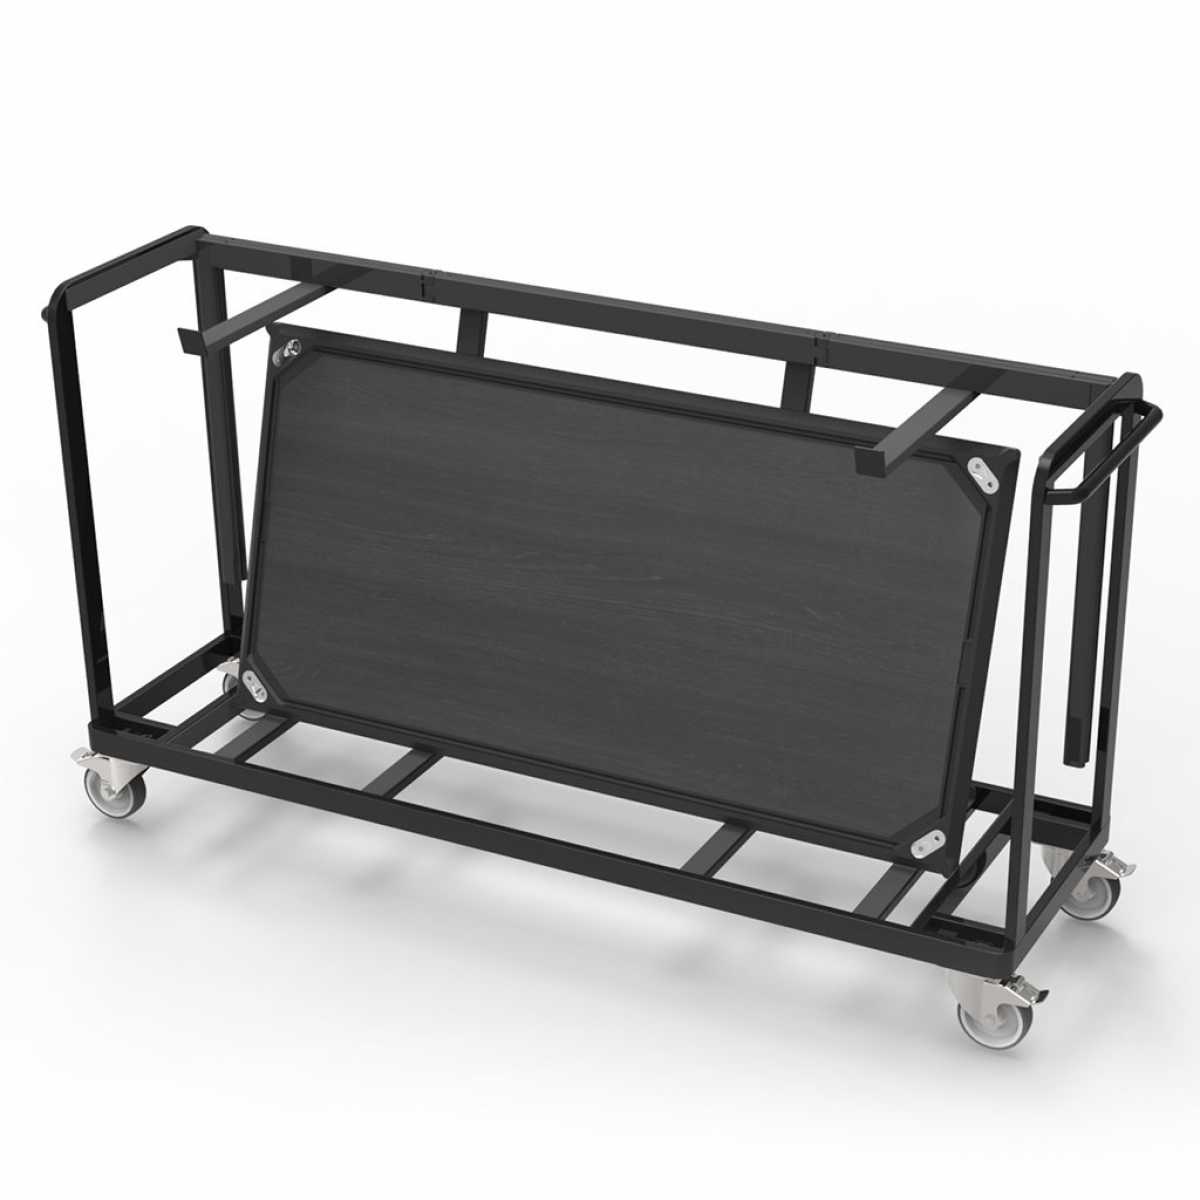 CRASTER 1500 Rectangle – Trolley